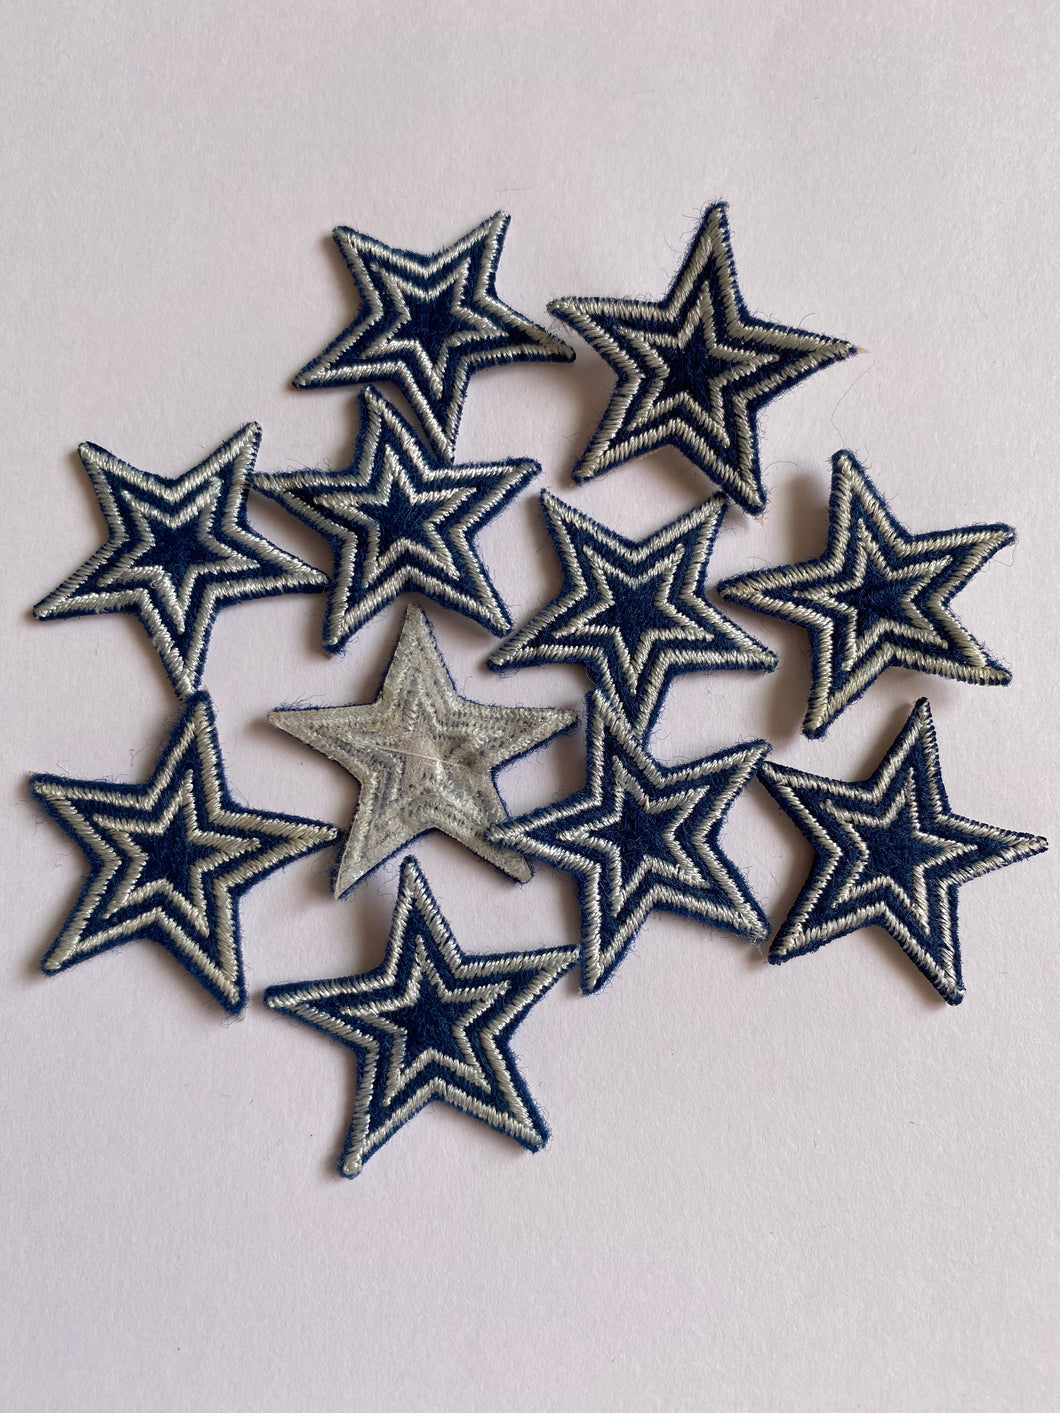 11 BLUE STARS 30mm Wide Patch Badge Leather Jackets Coats Jeans Dresses Tops Babies Blazers Shirts Skirts Bags Caps Hats Sewing Art Craft